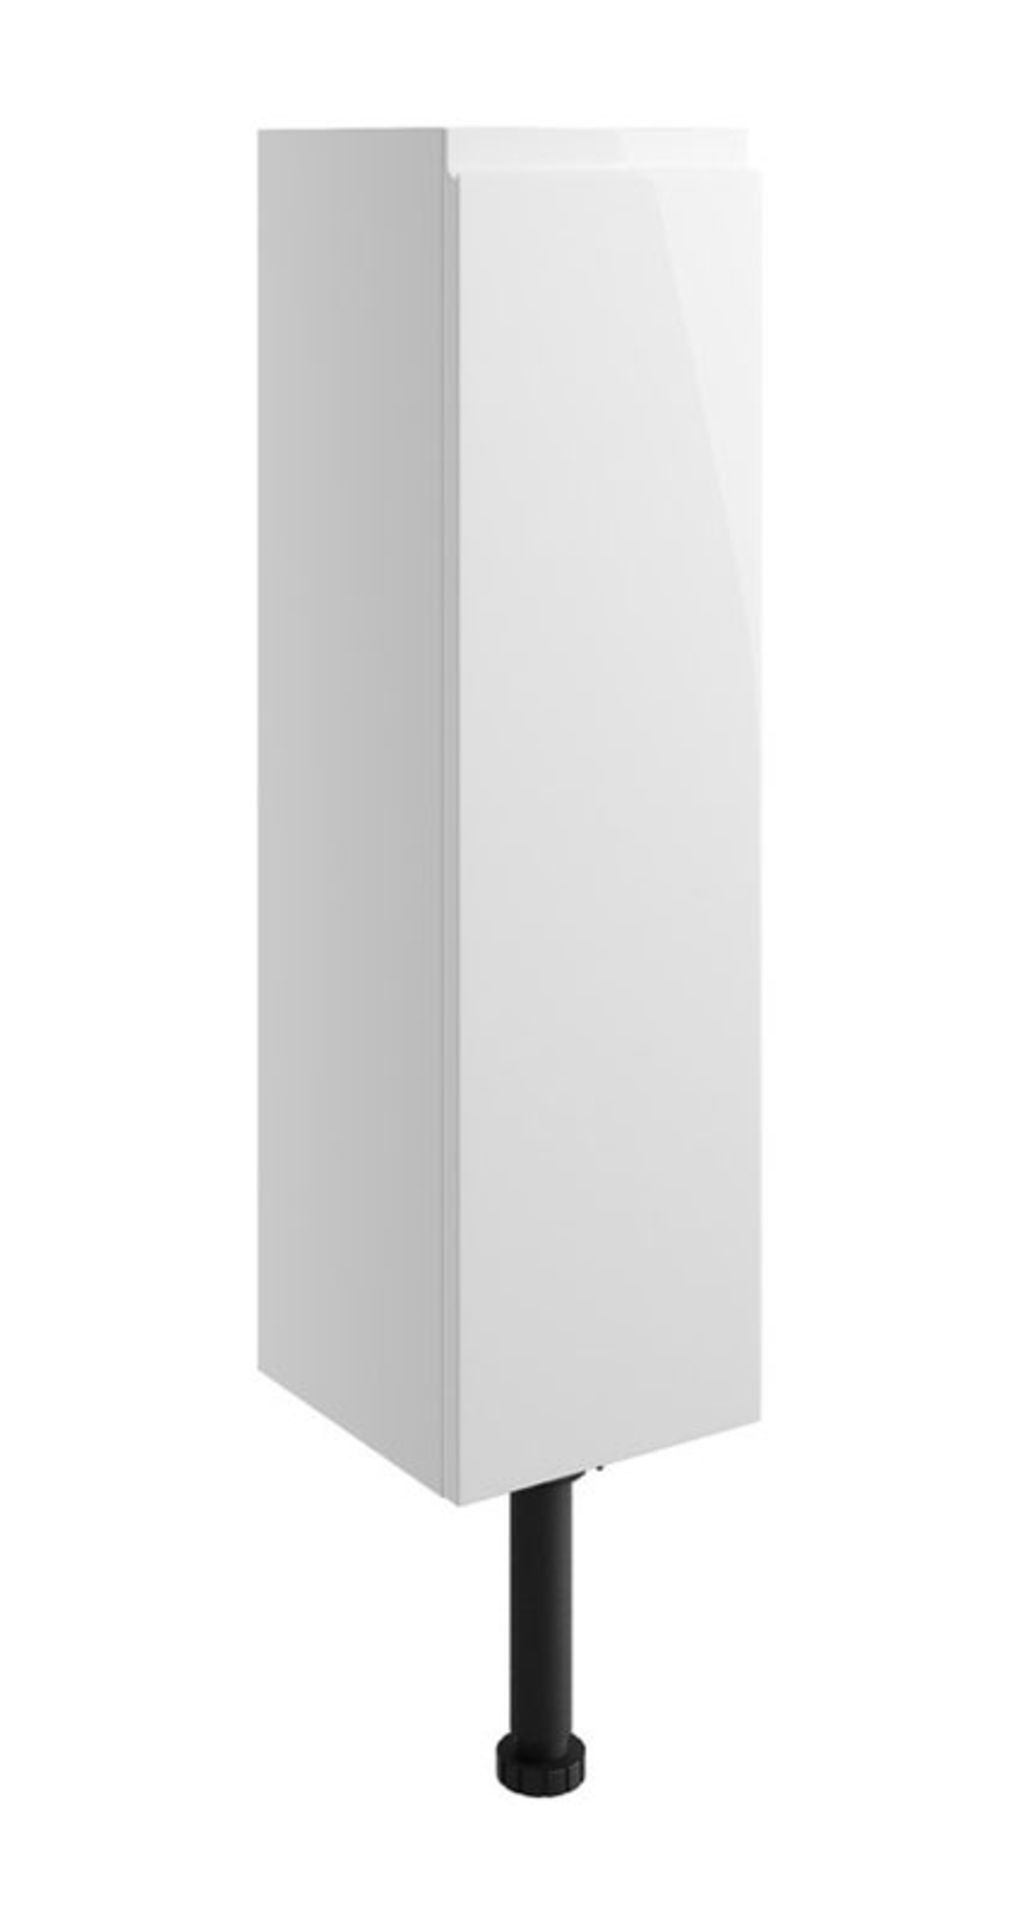 NEW (N149) Valesso Gloss White 200mm Slim Base Unit. RRP £170.00. 720mm x 200mm x 218mm (HxWxD... - Image 2 of 2